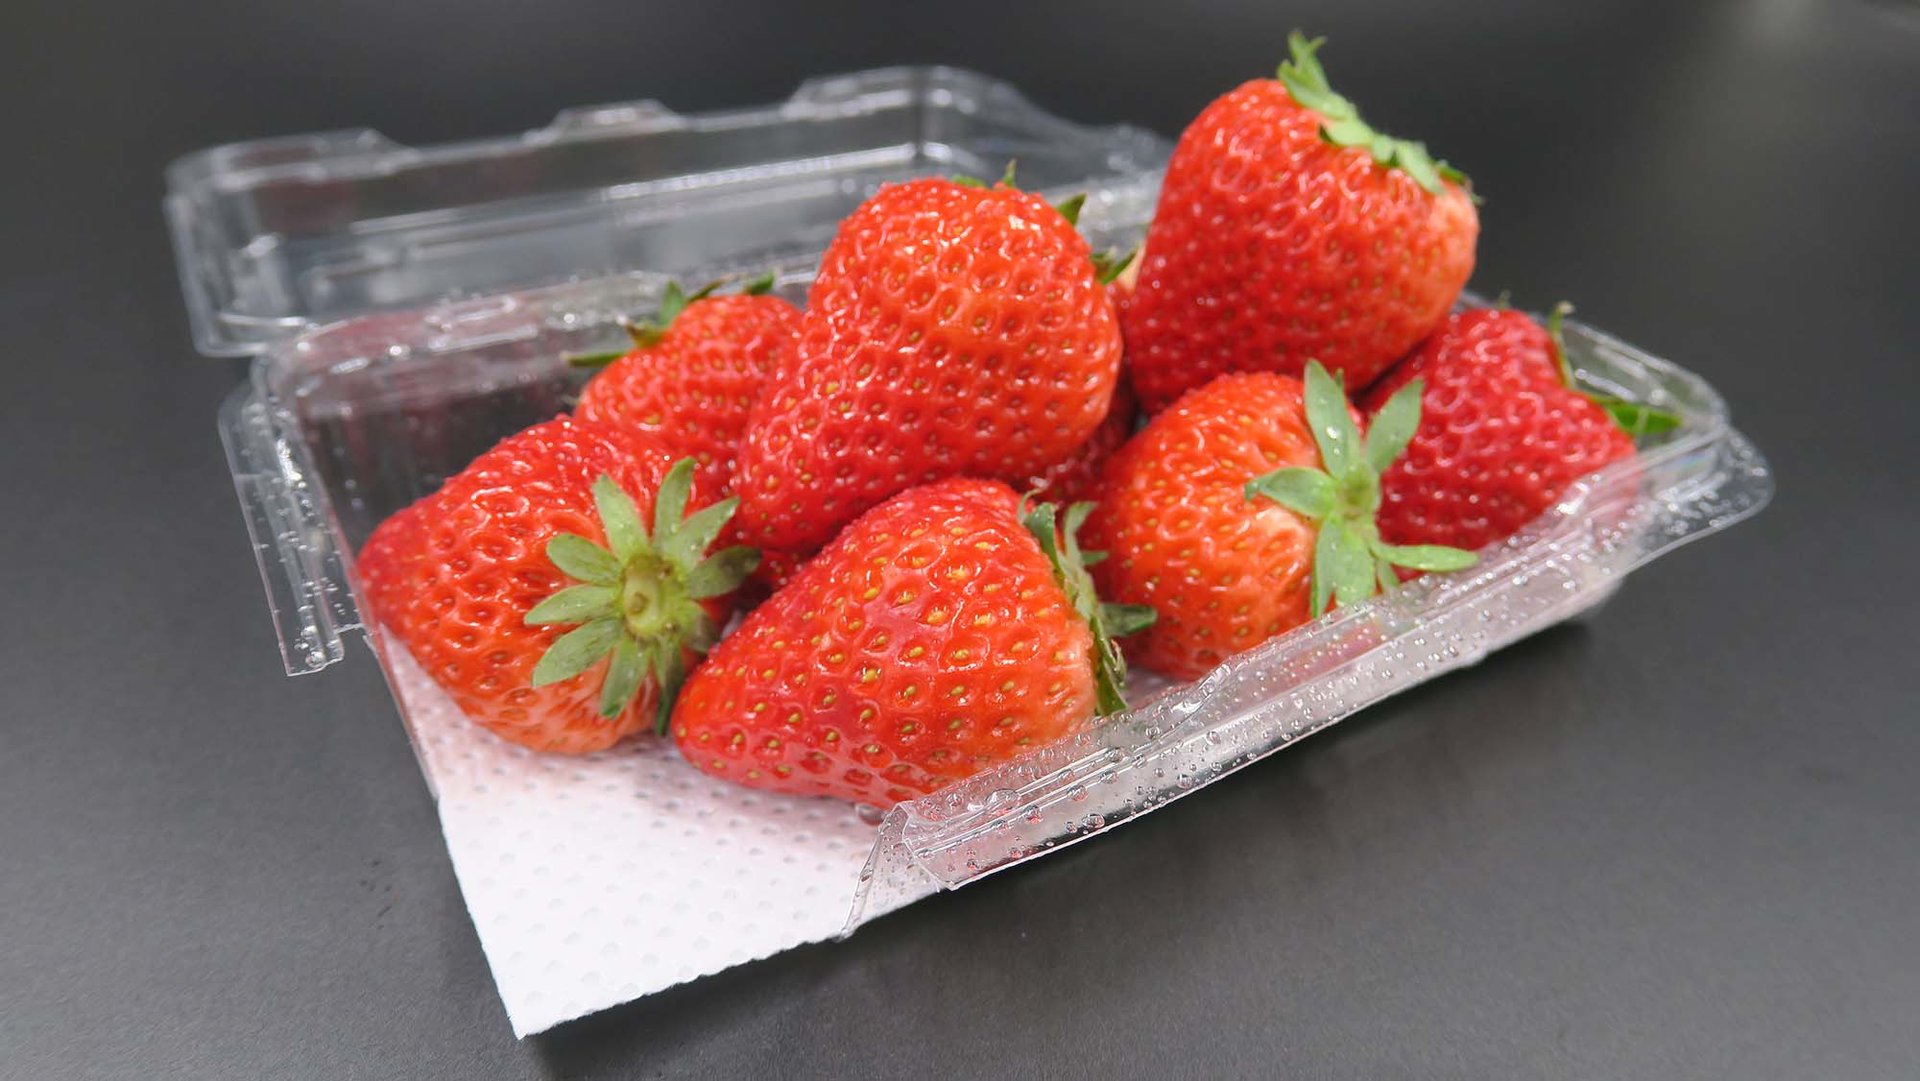 Demi absorbent super absorbent pads maintaining great product presentation for fruit